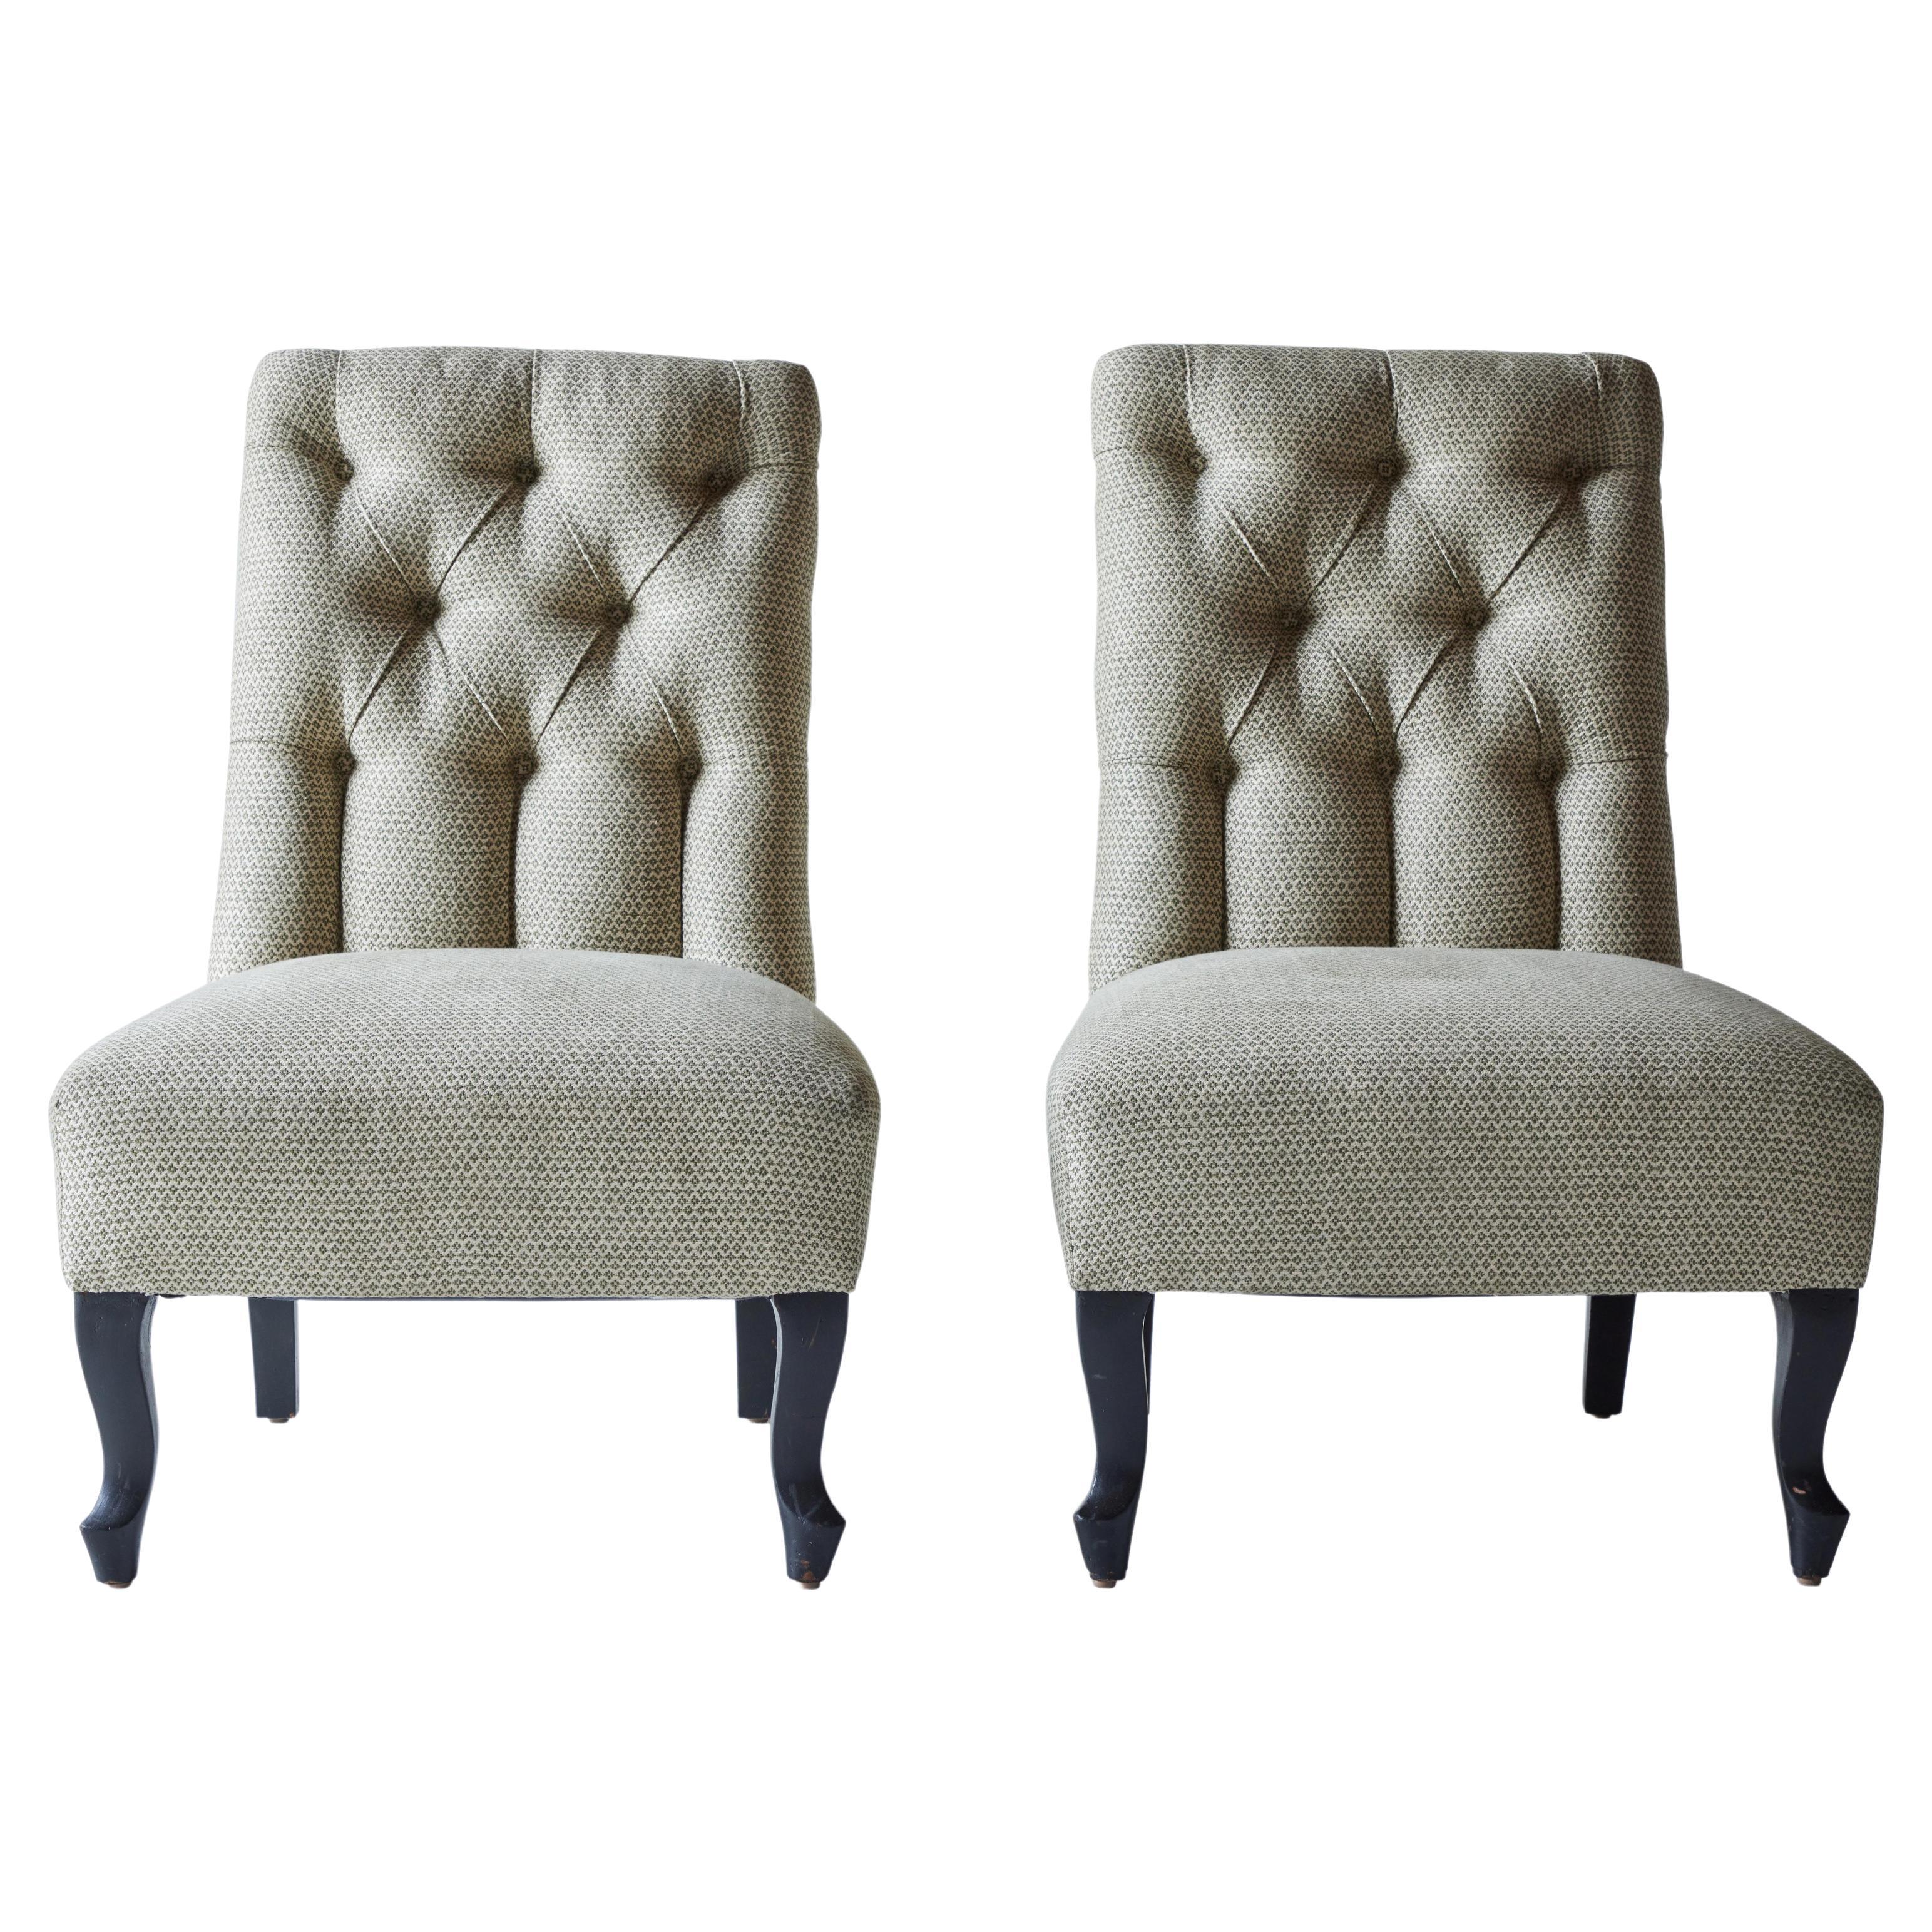 Pair of 19th Century French Tufted Slipper Chairs